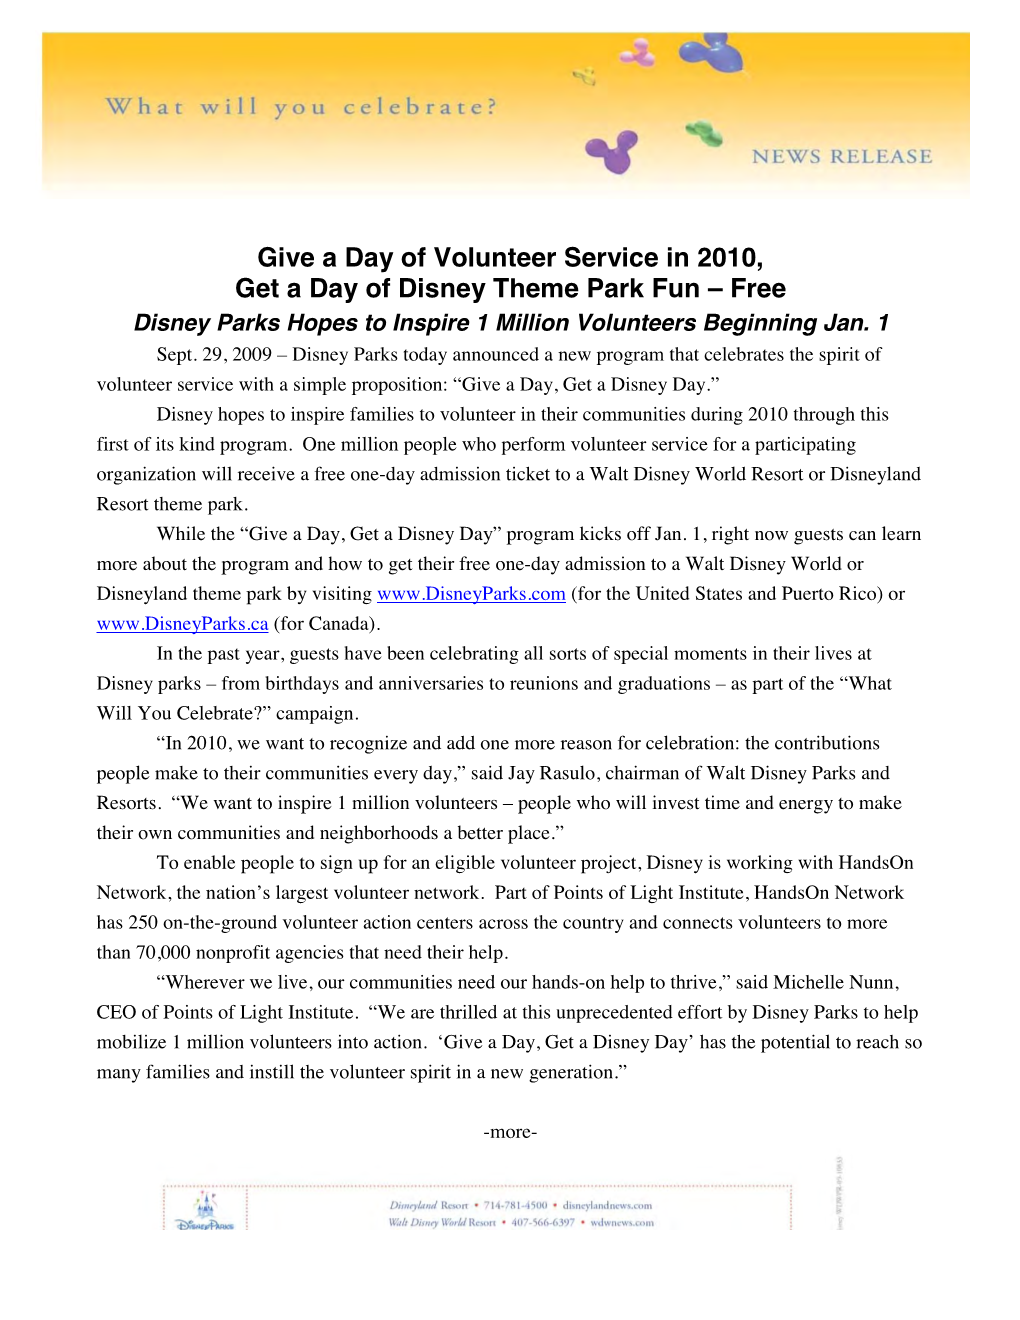 Give a Day of Volunteer Service in 2010, Get a Day of Disney Theme Park Fun – Free